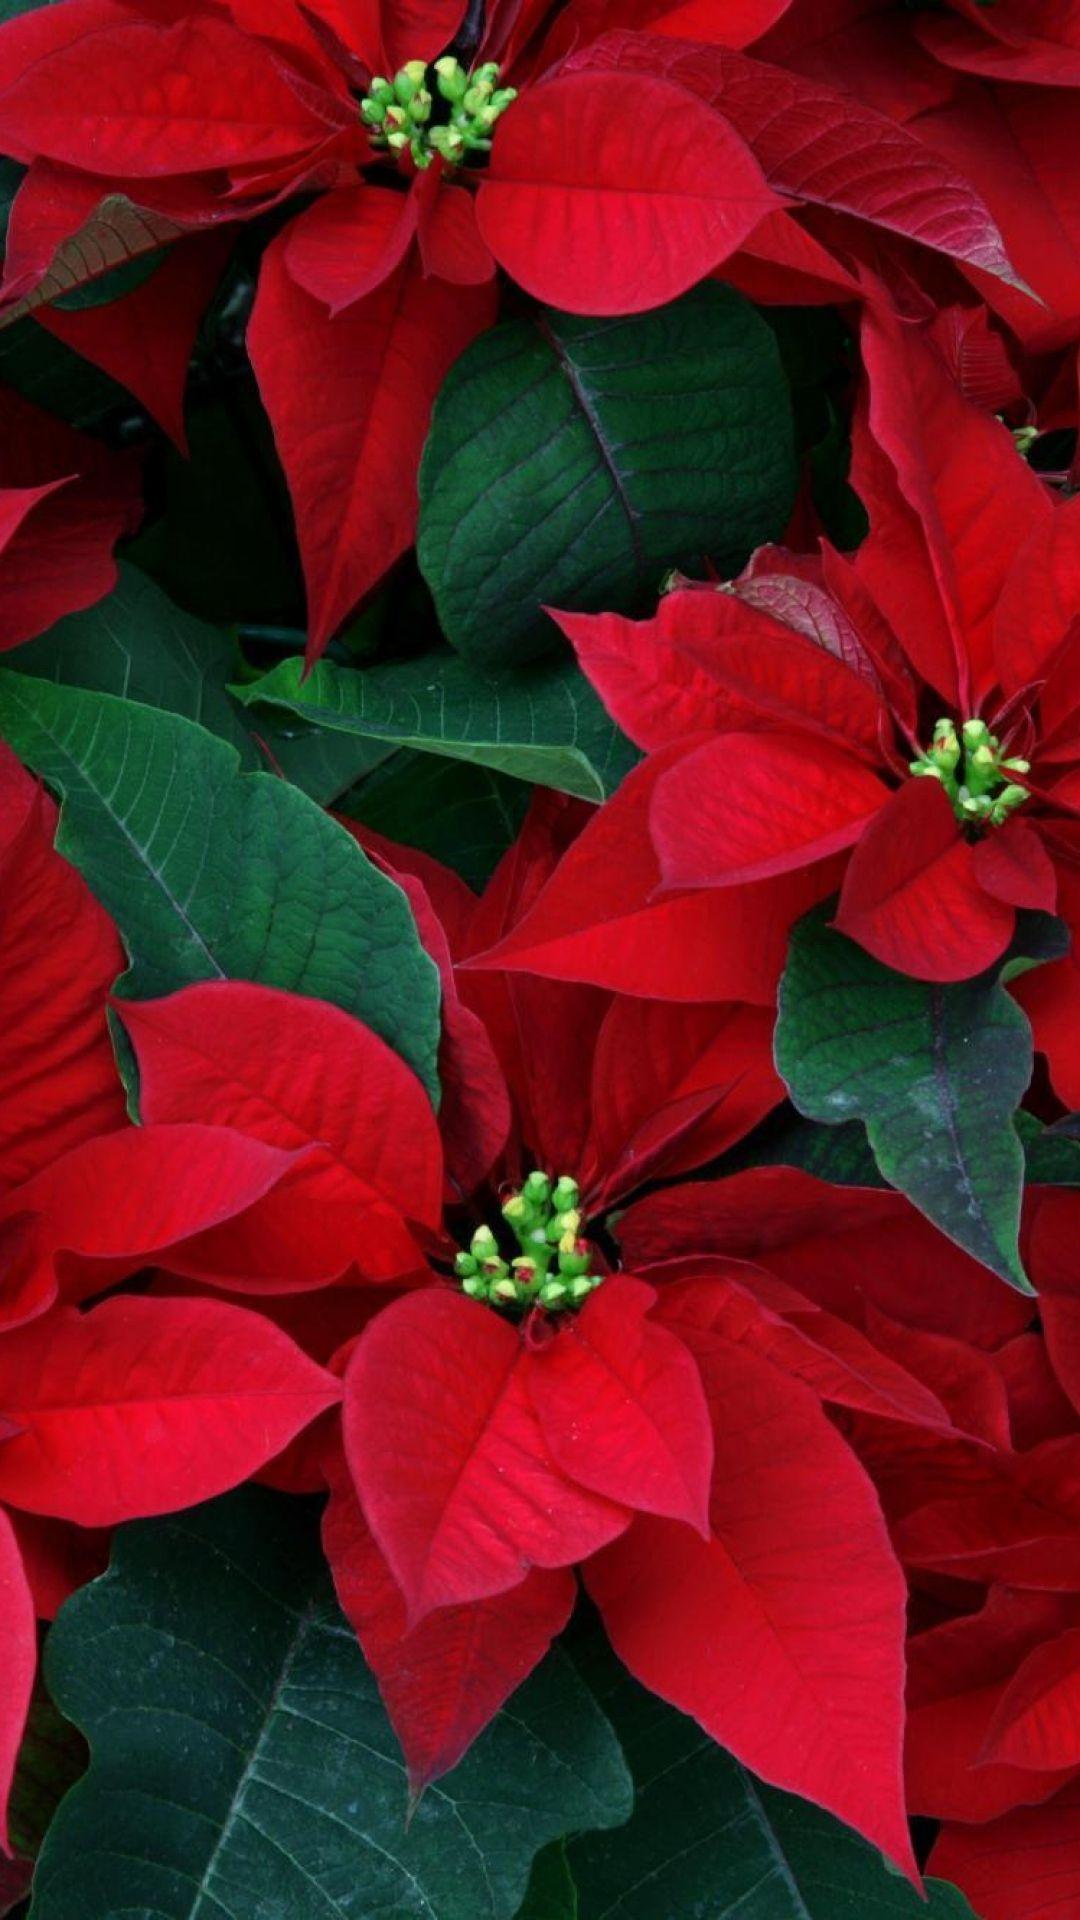 poinsettia, flowers, herbs, leaves, red, close